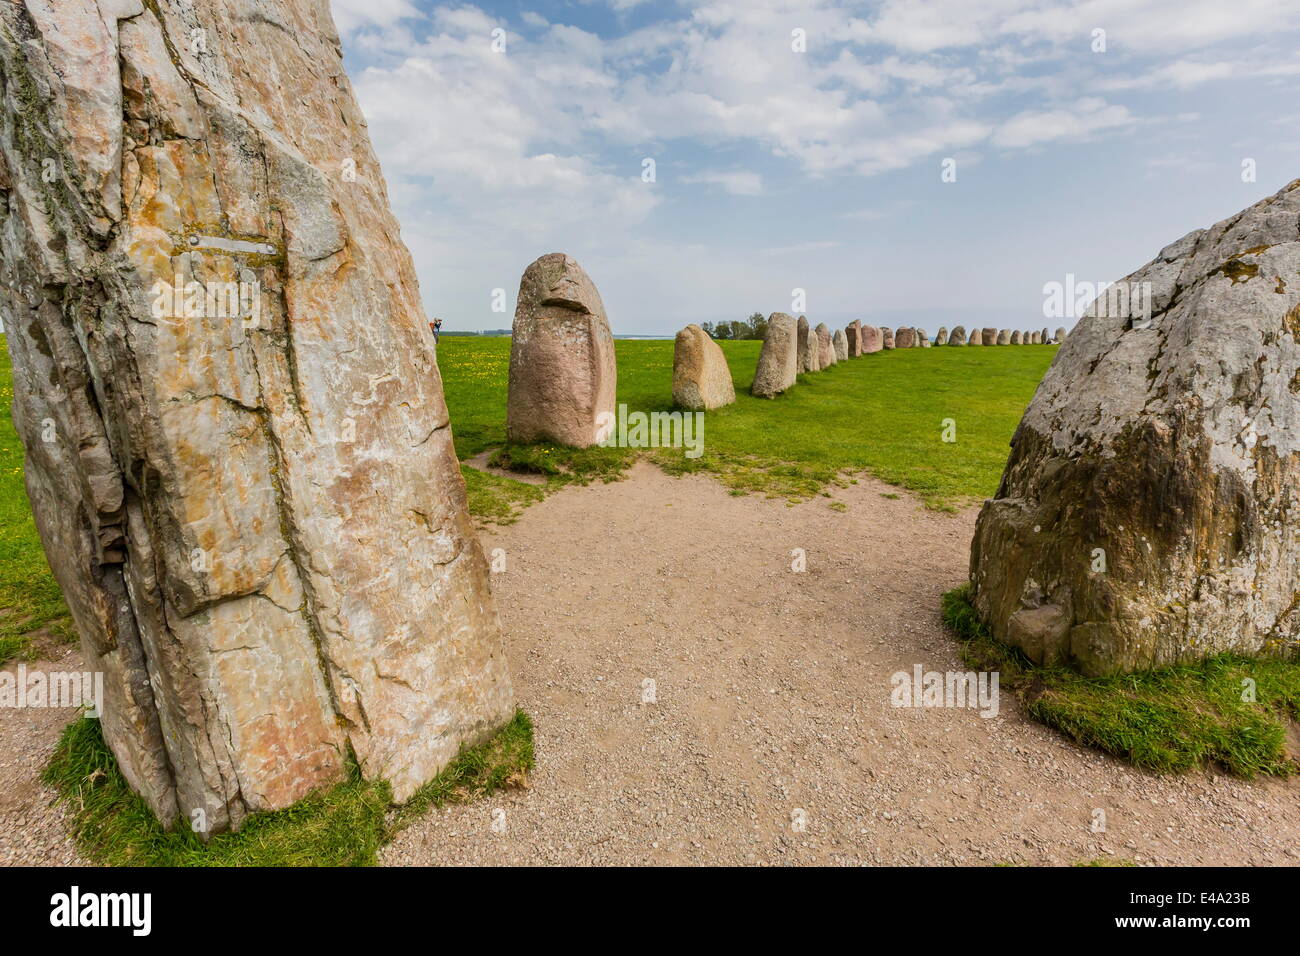 The standing stones in a shape of a ship known as Als Stene (Aleos Stones) (Ale's Stones), Baltic Sea, southern Sweden Stock Photo